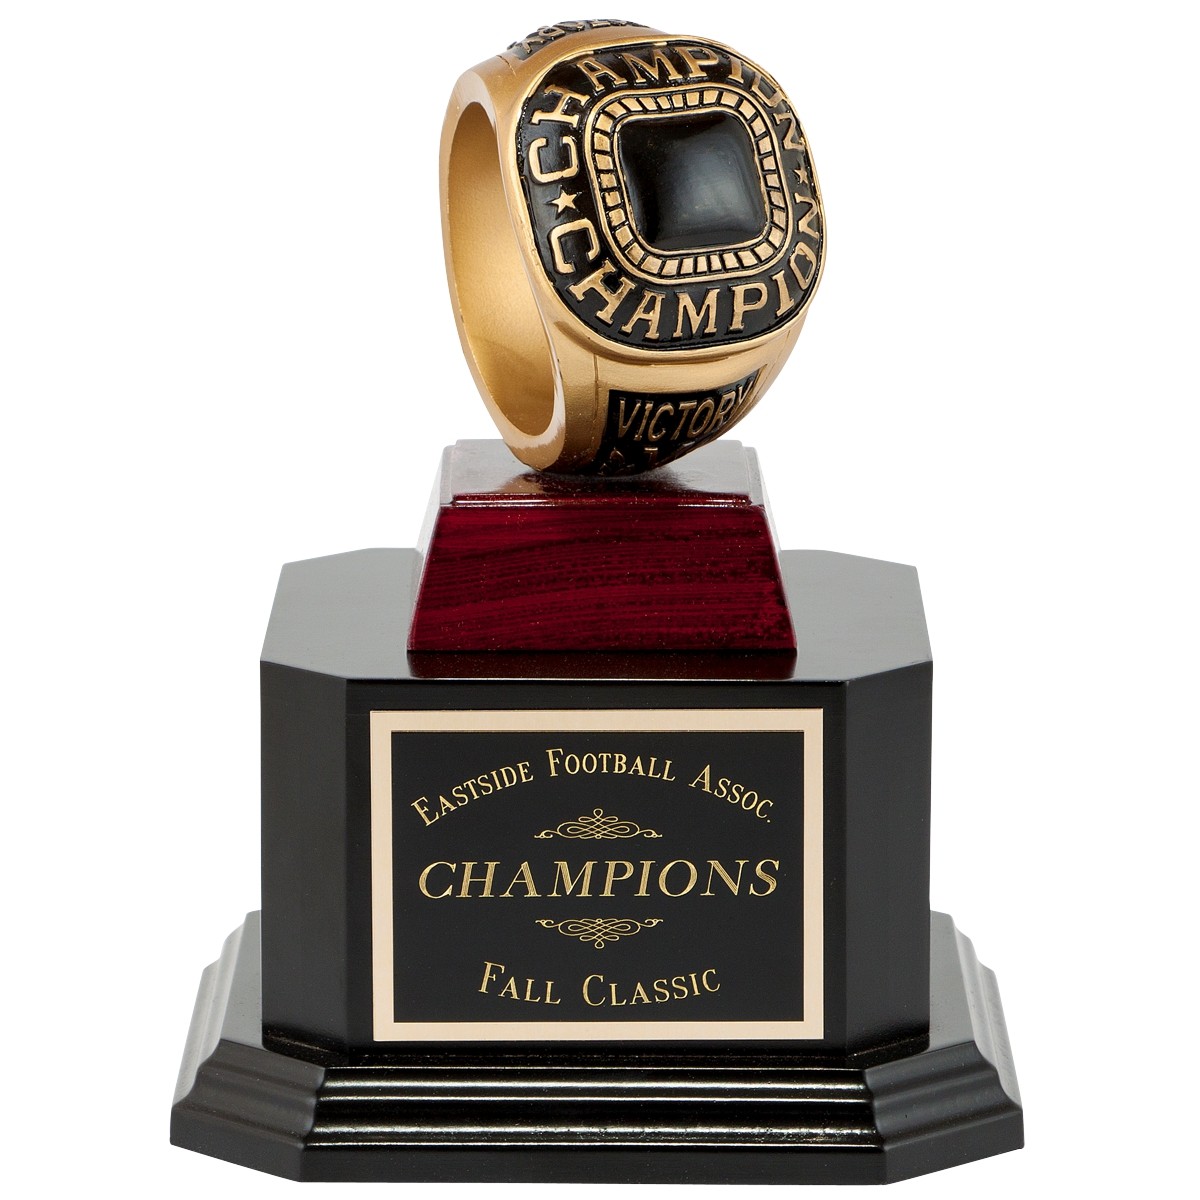 In search of perpetual trophies? Whether you need an award for a corporate event, community fundraiser, or fantasy football league, you’ll find it here.